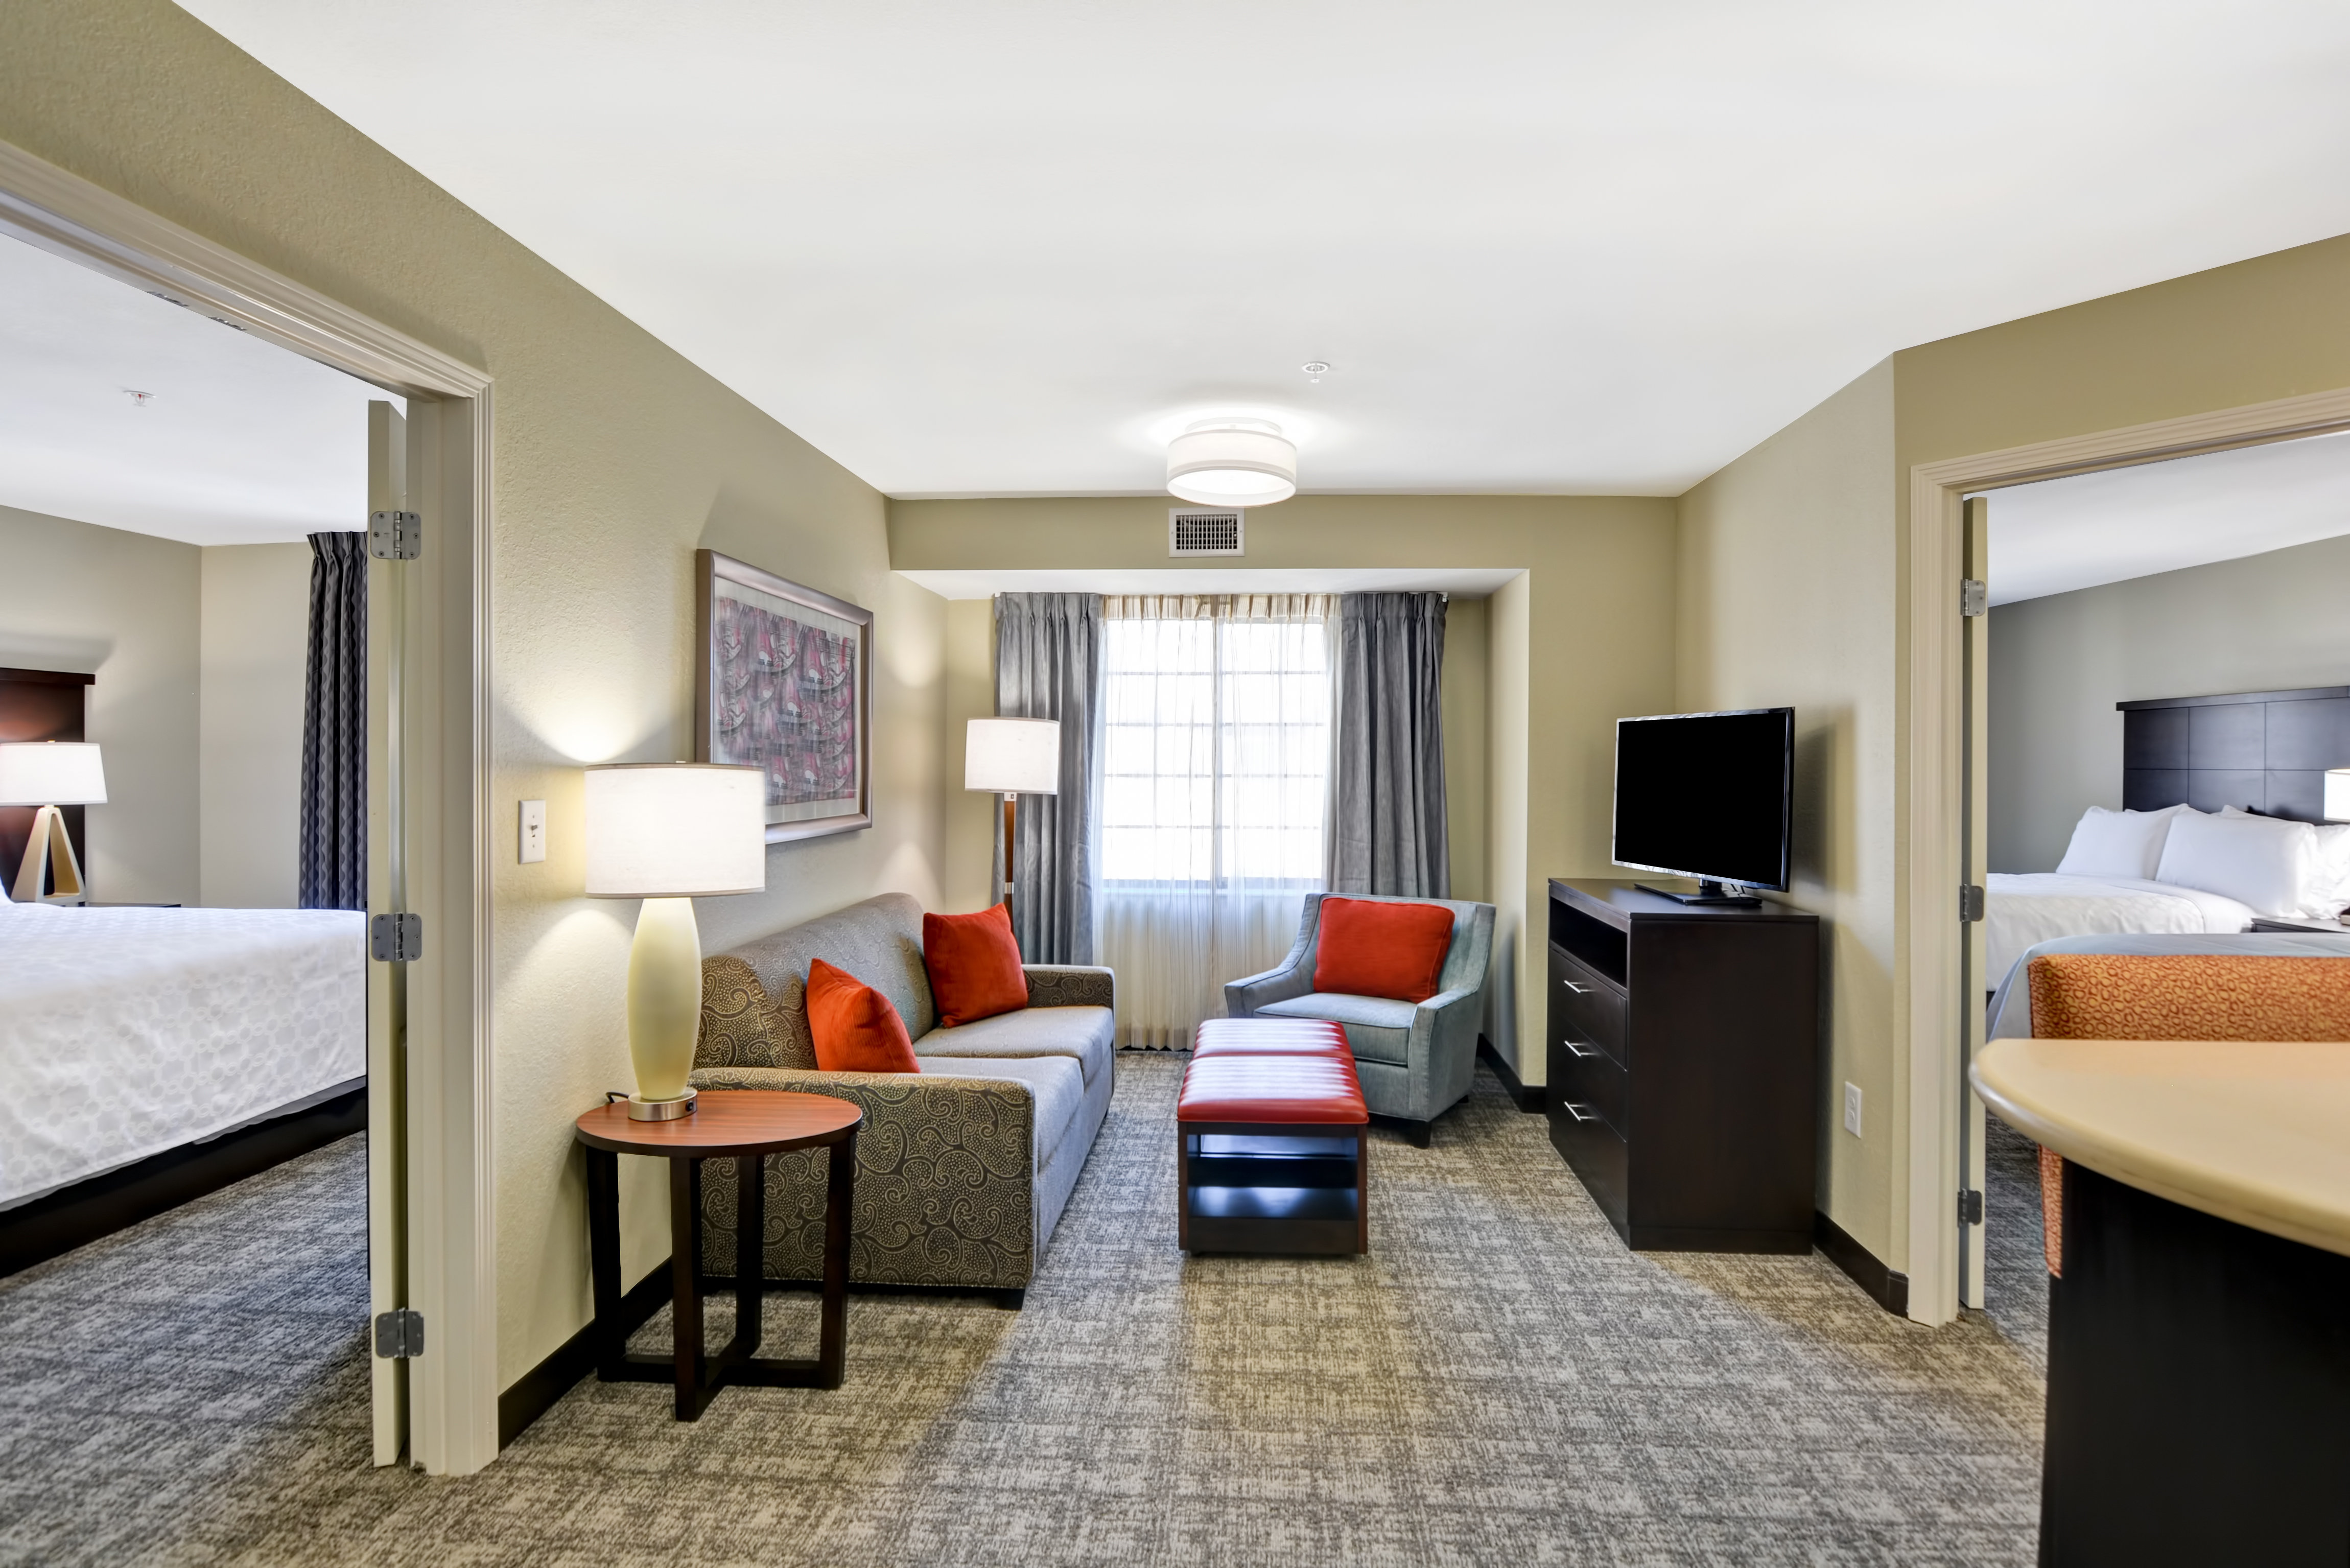 Our spacious two bedroom suite is great for families.